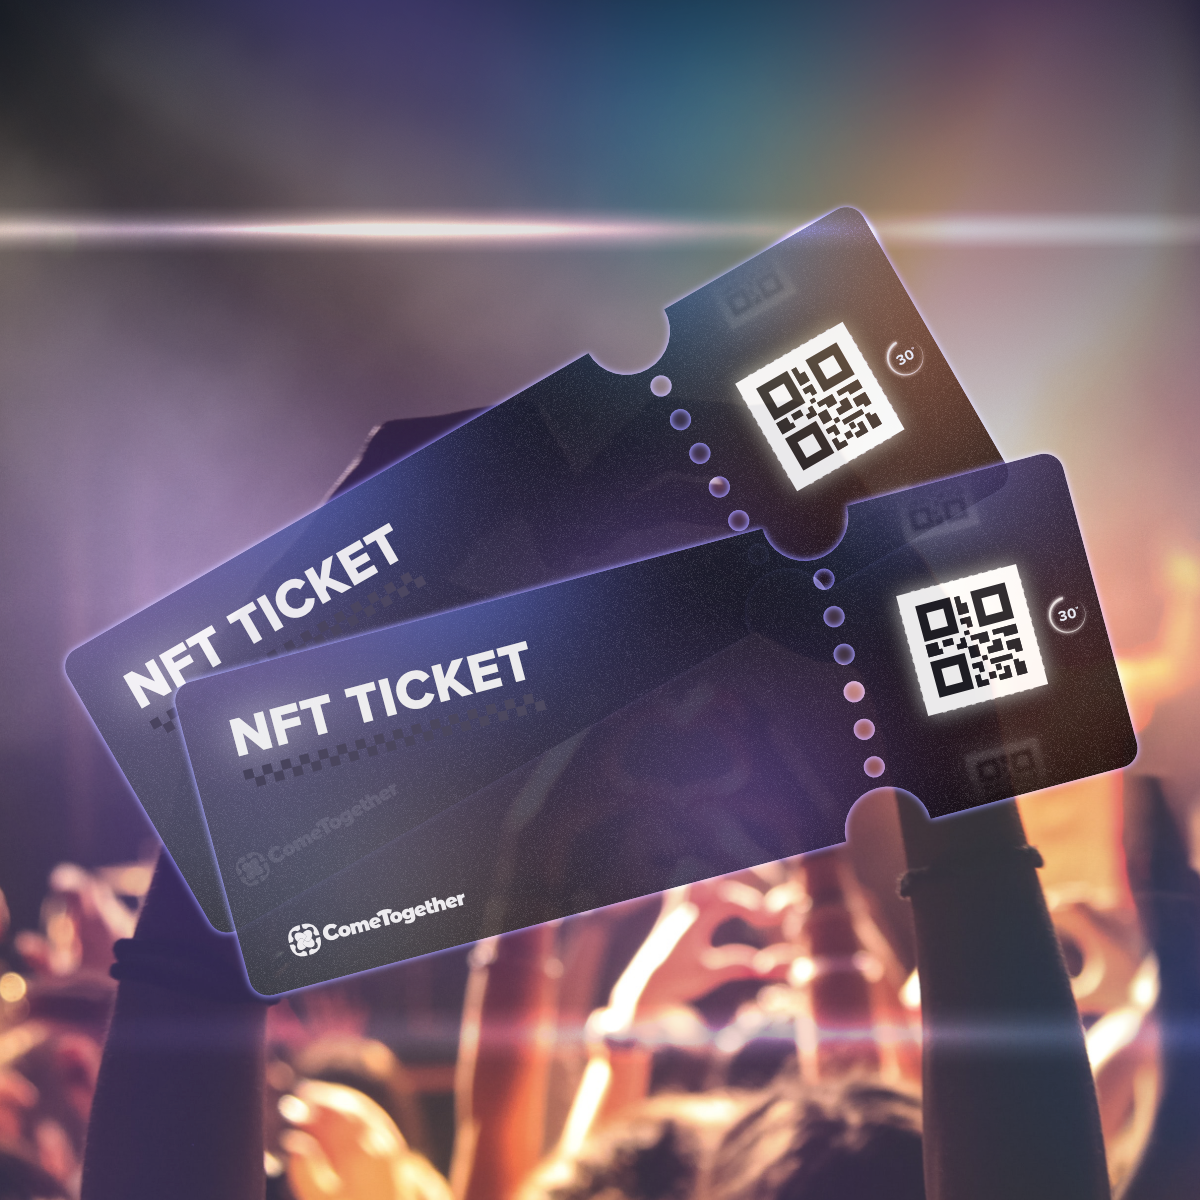 Two purple ComeTogether NFT Tickets in front of a concert crowd background.